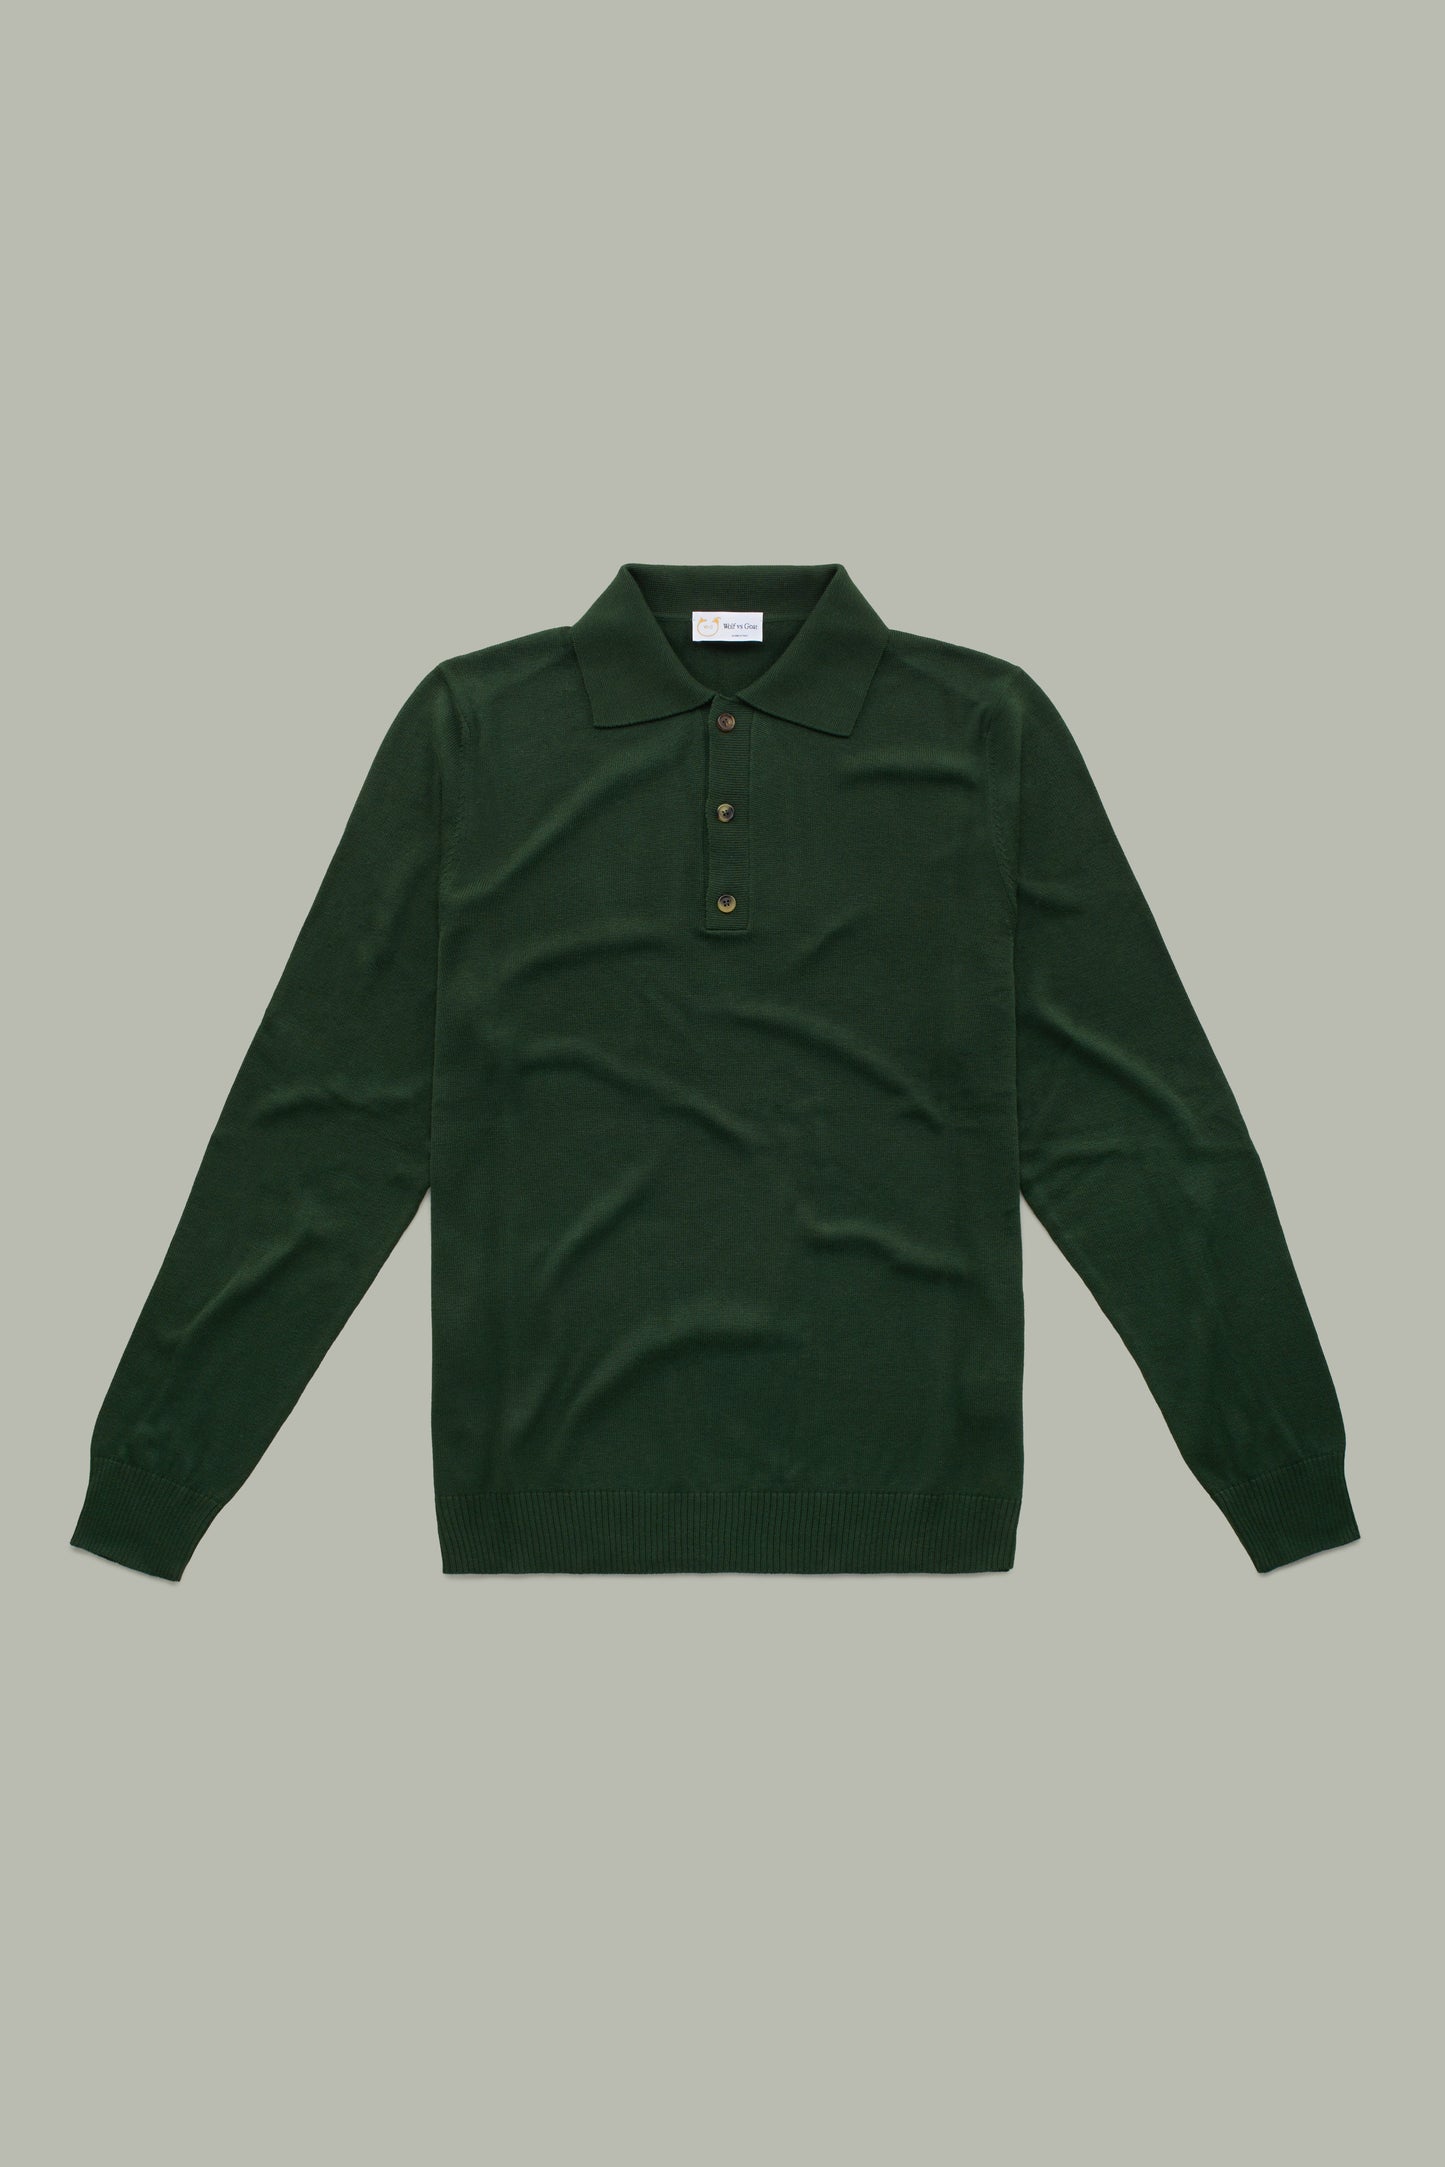 Long Sleeve Bamboo Cotton Cashmere Blend Knitted Polo Green